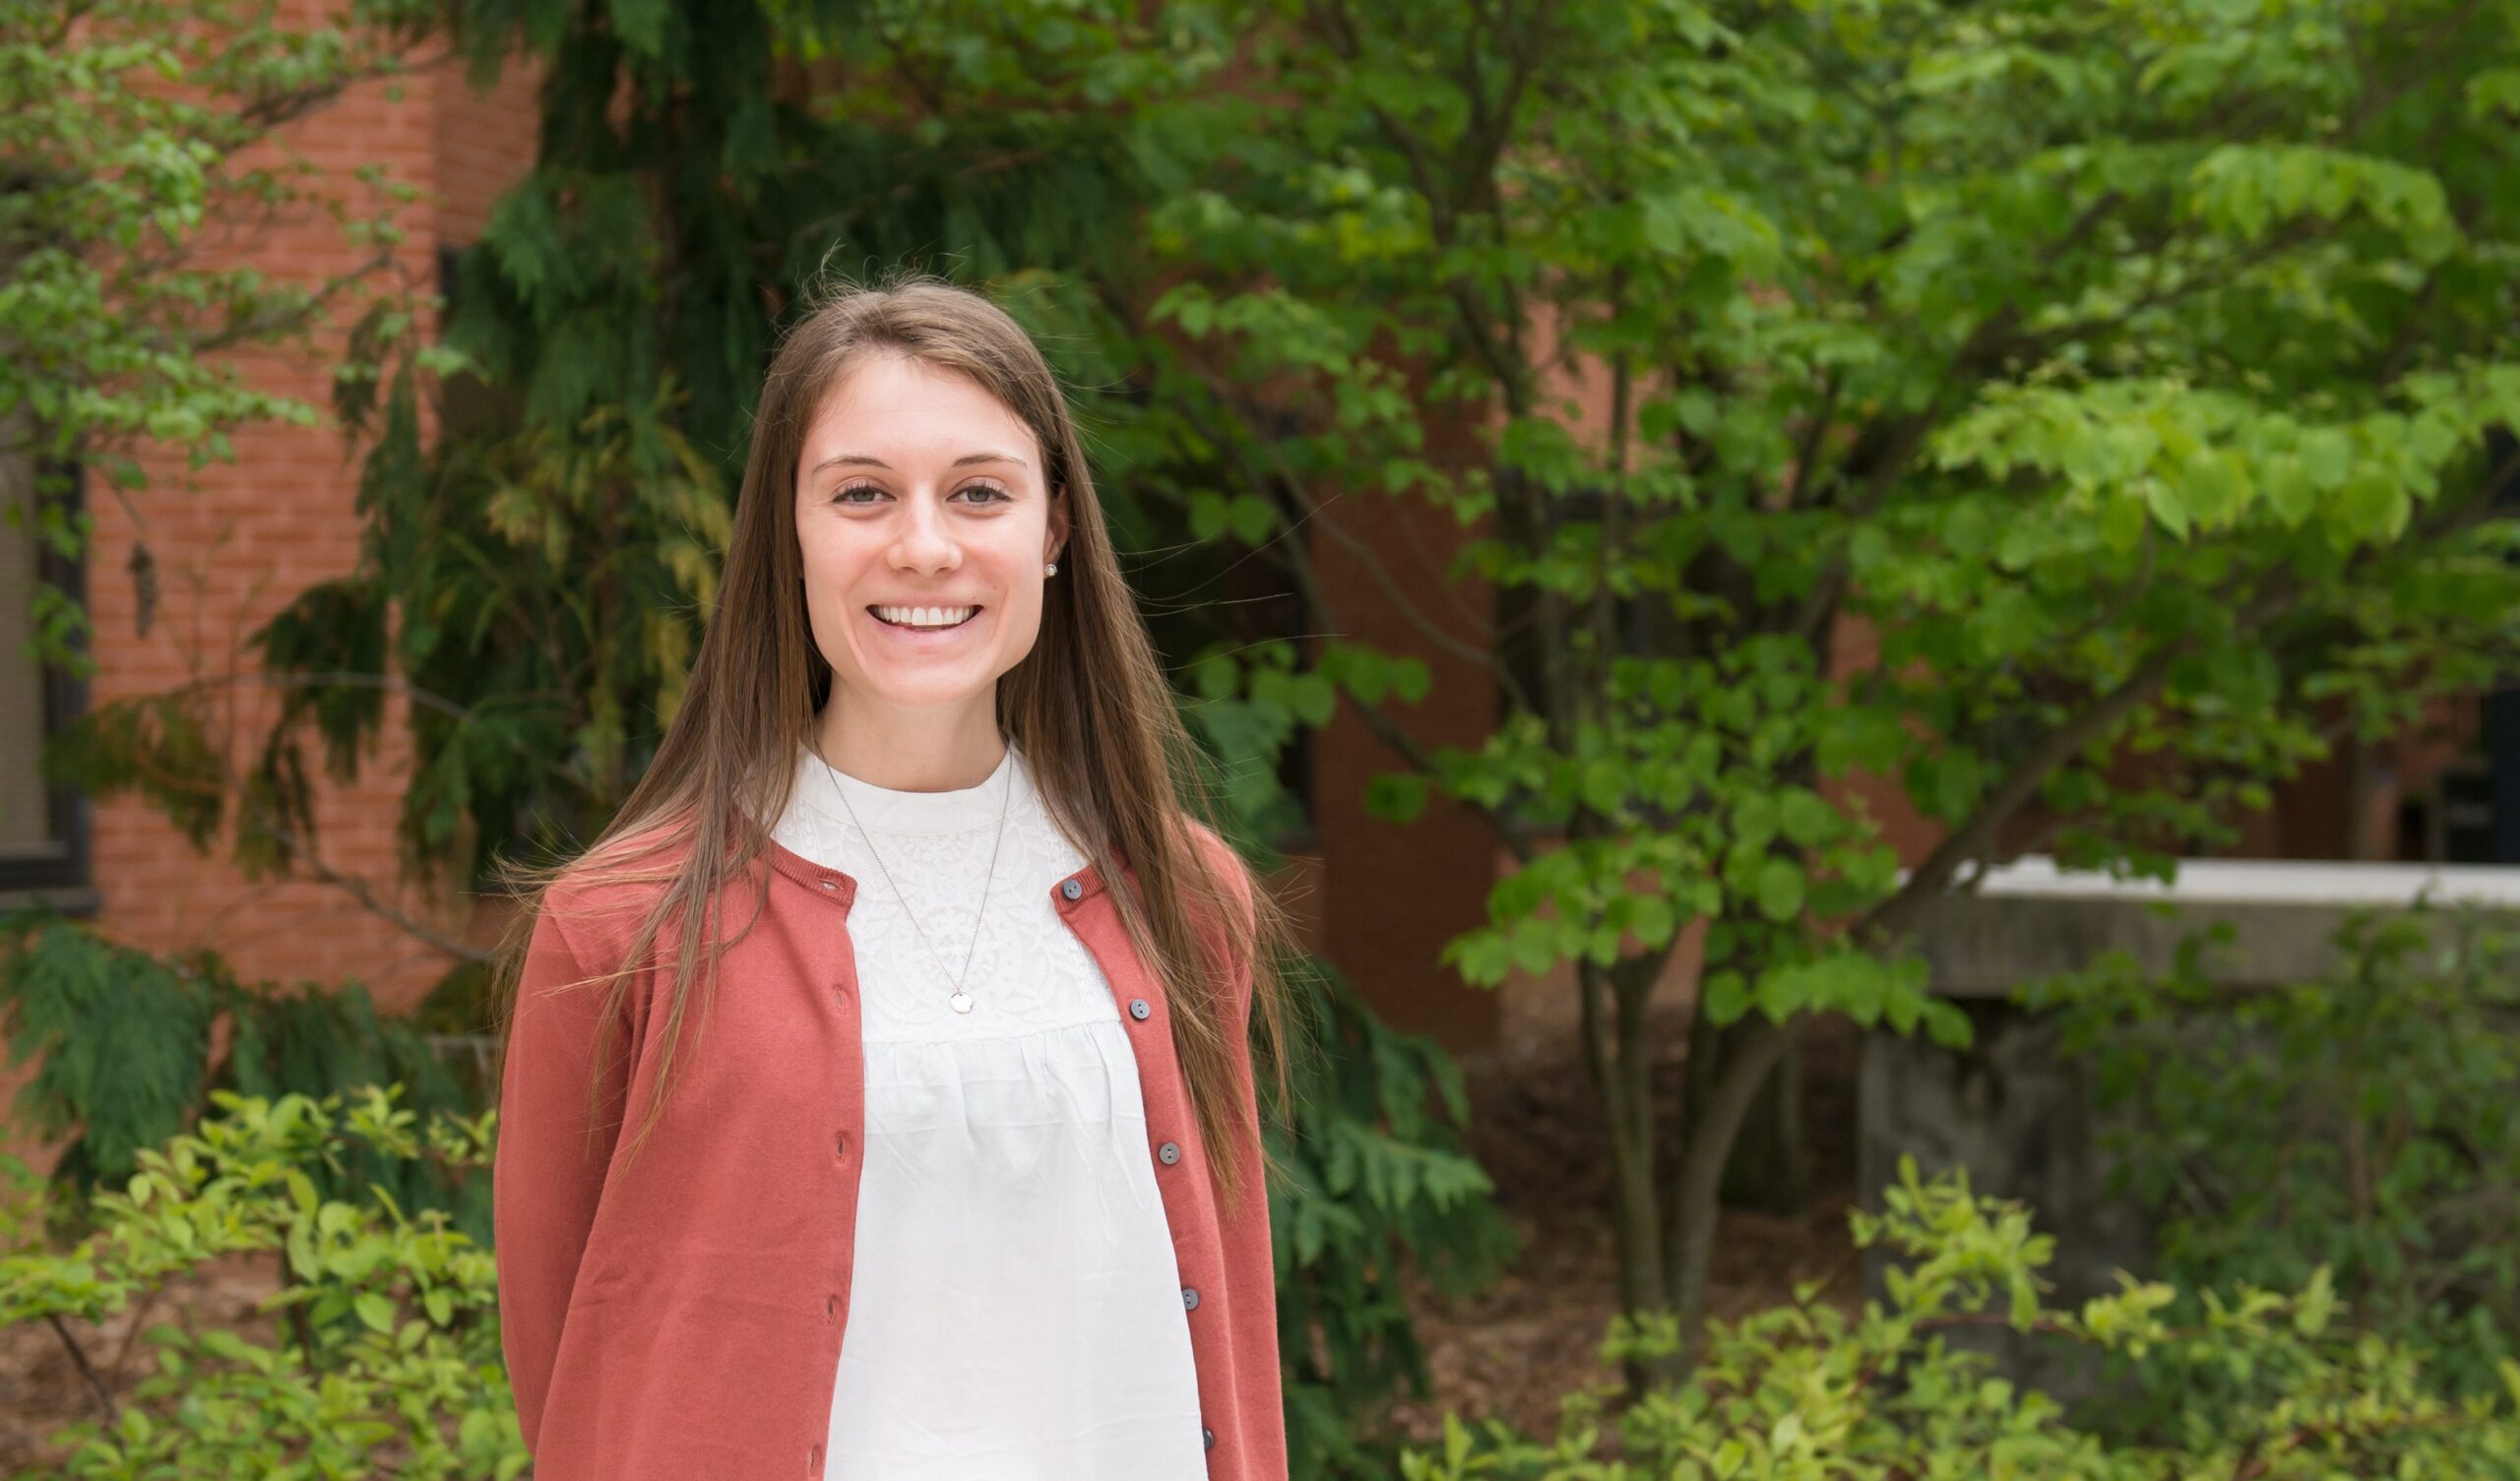 Hailey Lynch pairs all-star academic record with high-level internships to prep for investment career